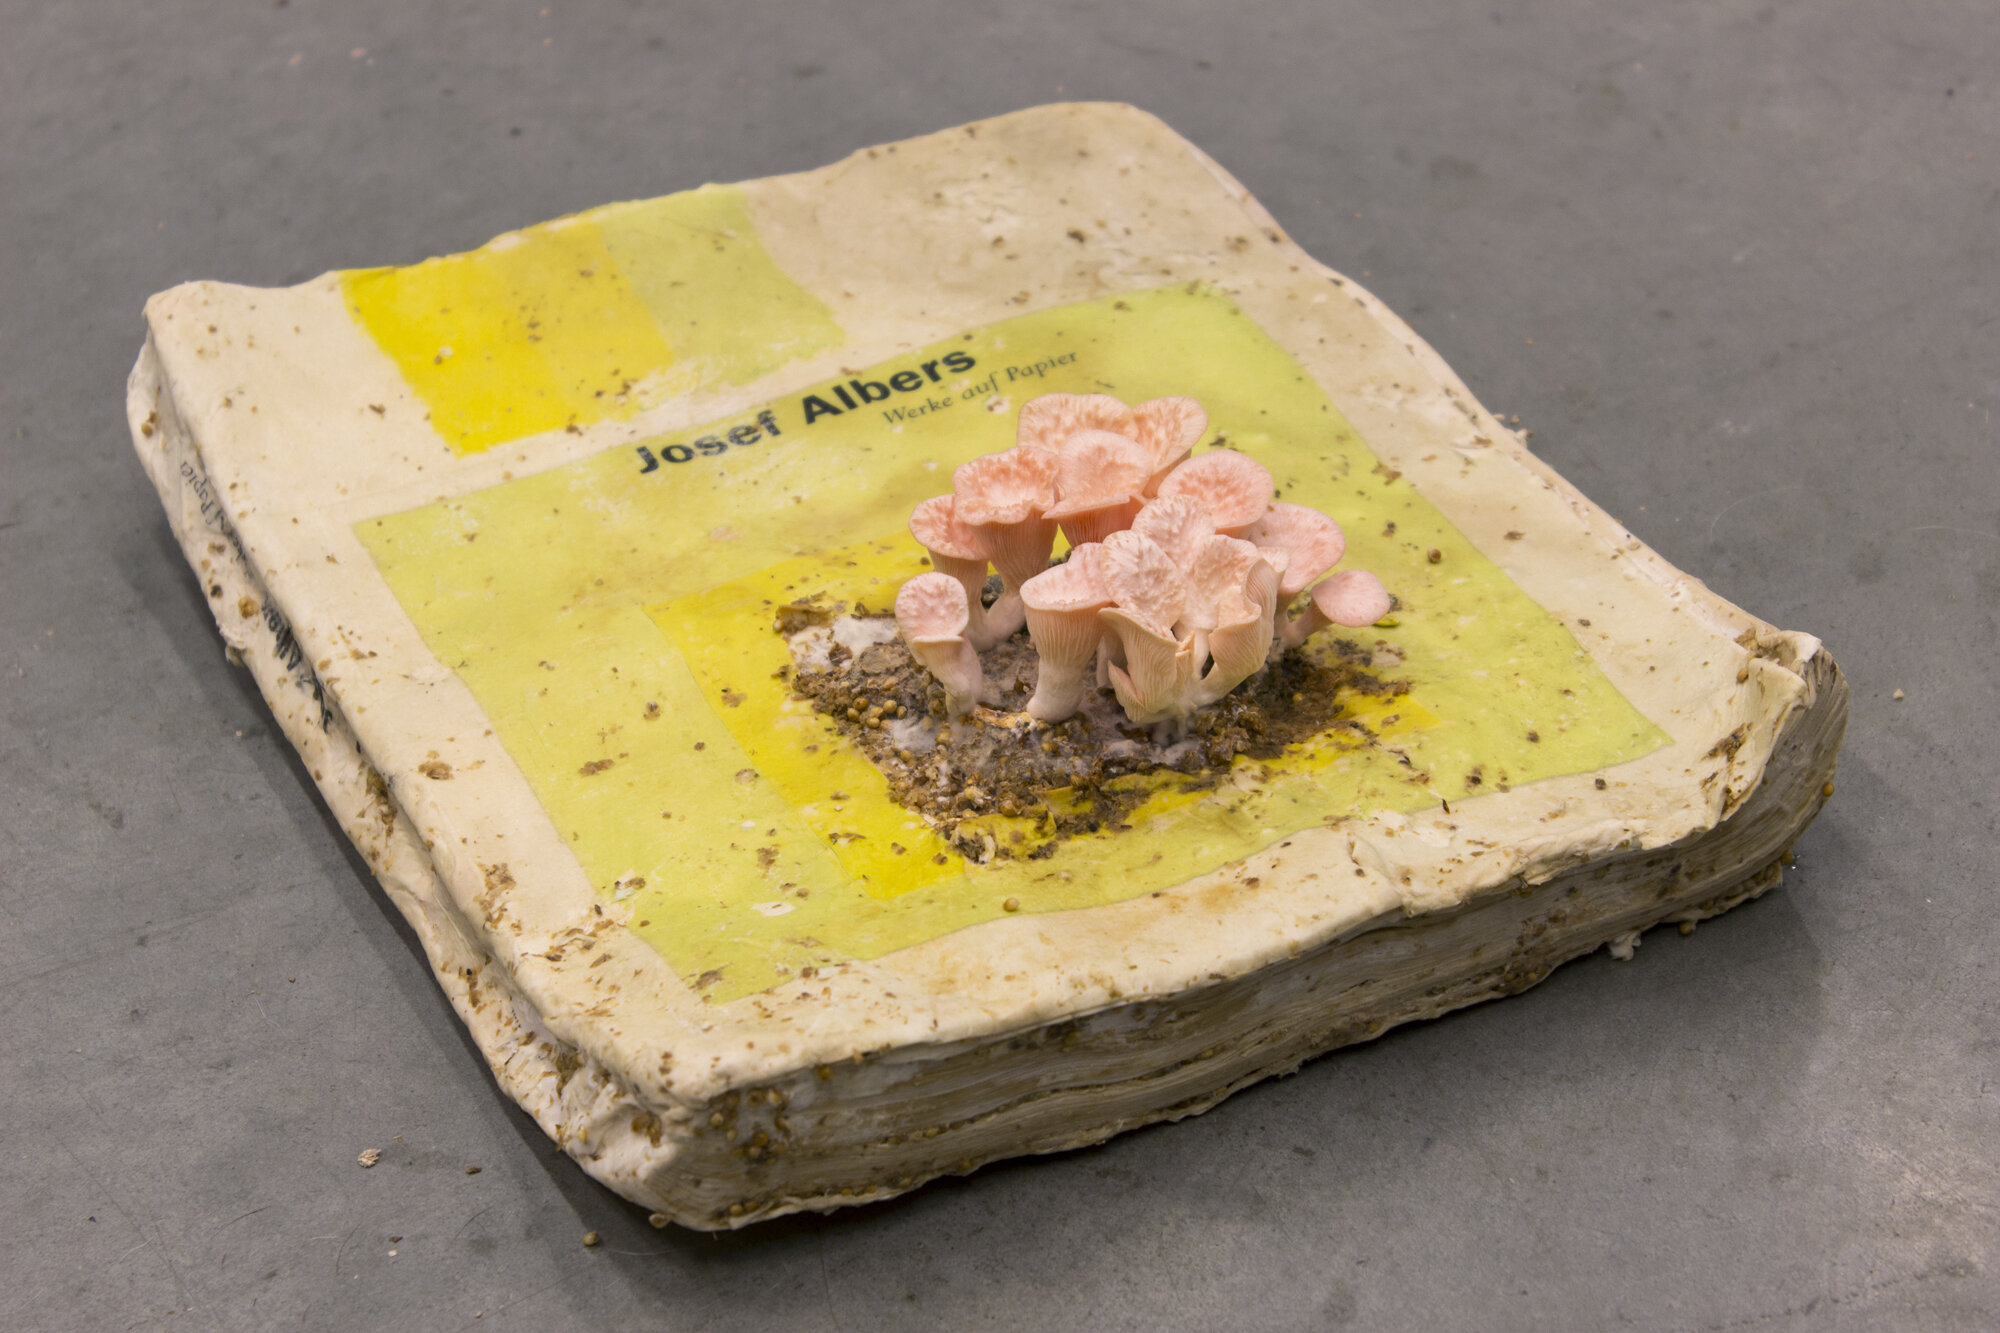  Sam Shoemaker  Joseph Albers , 2019 art catalogue inoculated with pink oyster spawn 16 x 11 x 3 inches (41 x 28 x 8 cm) 